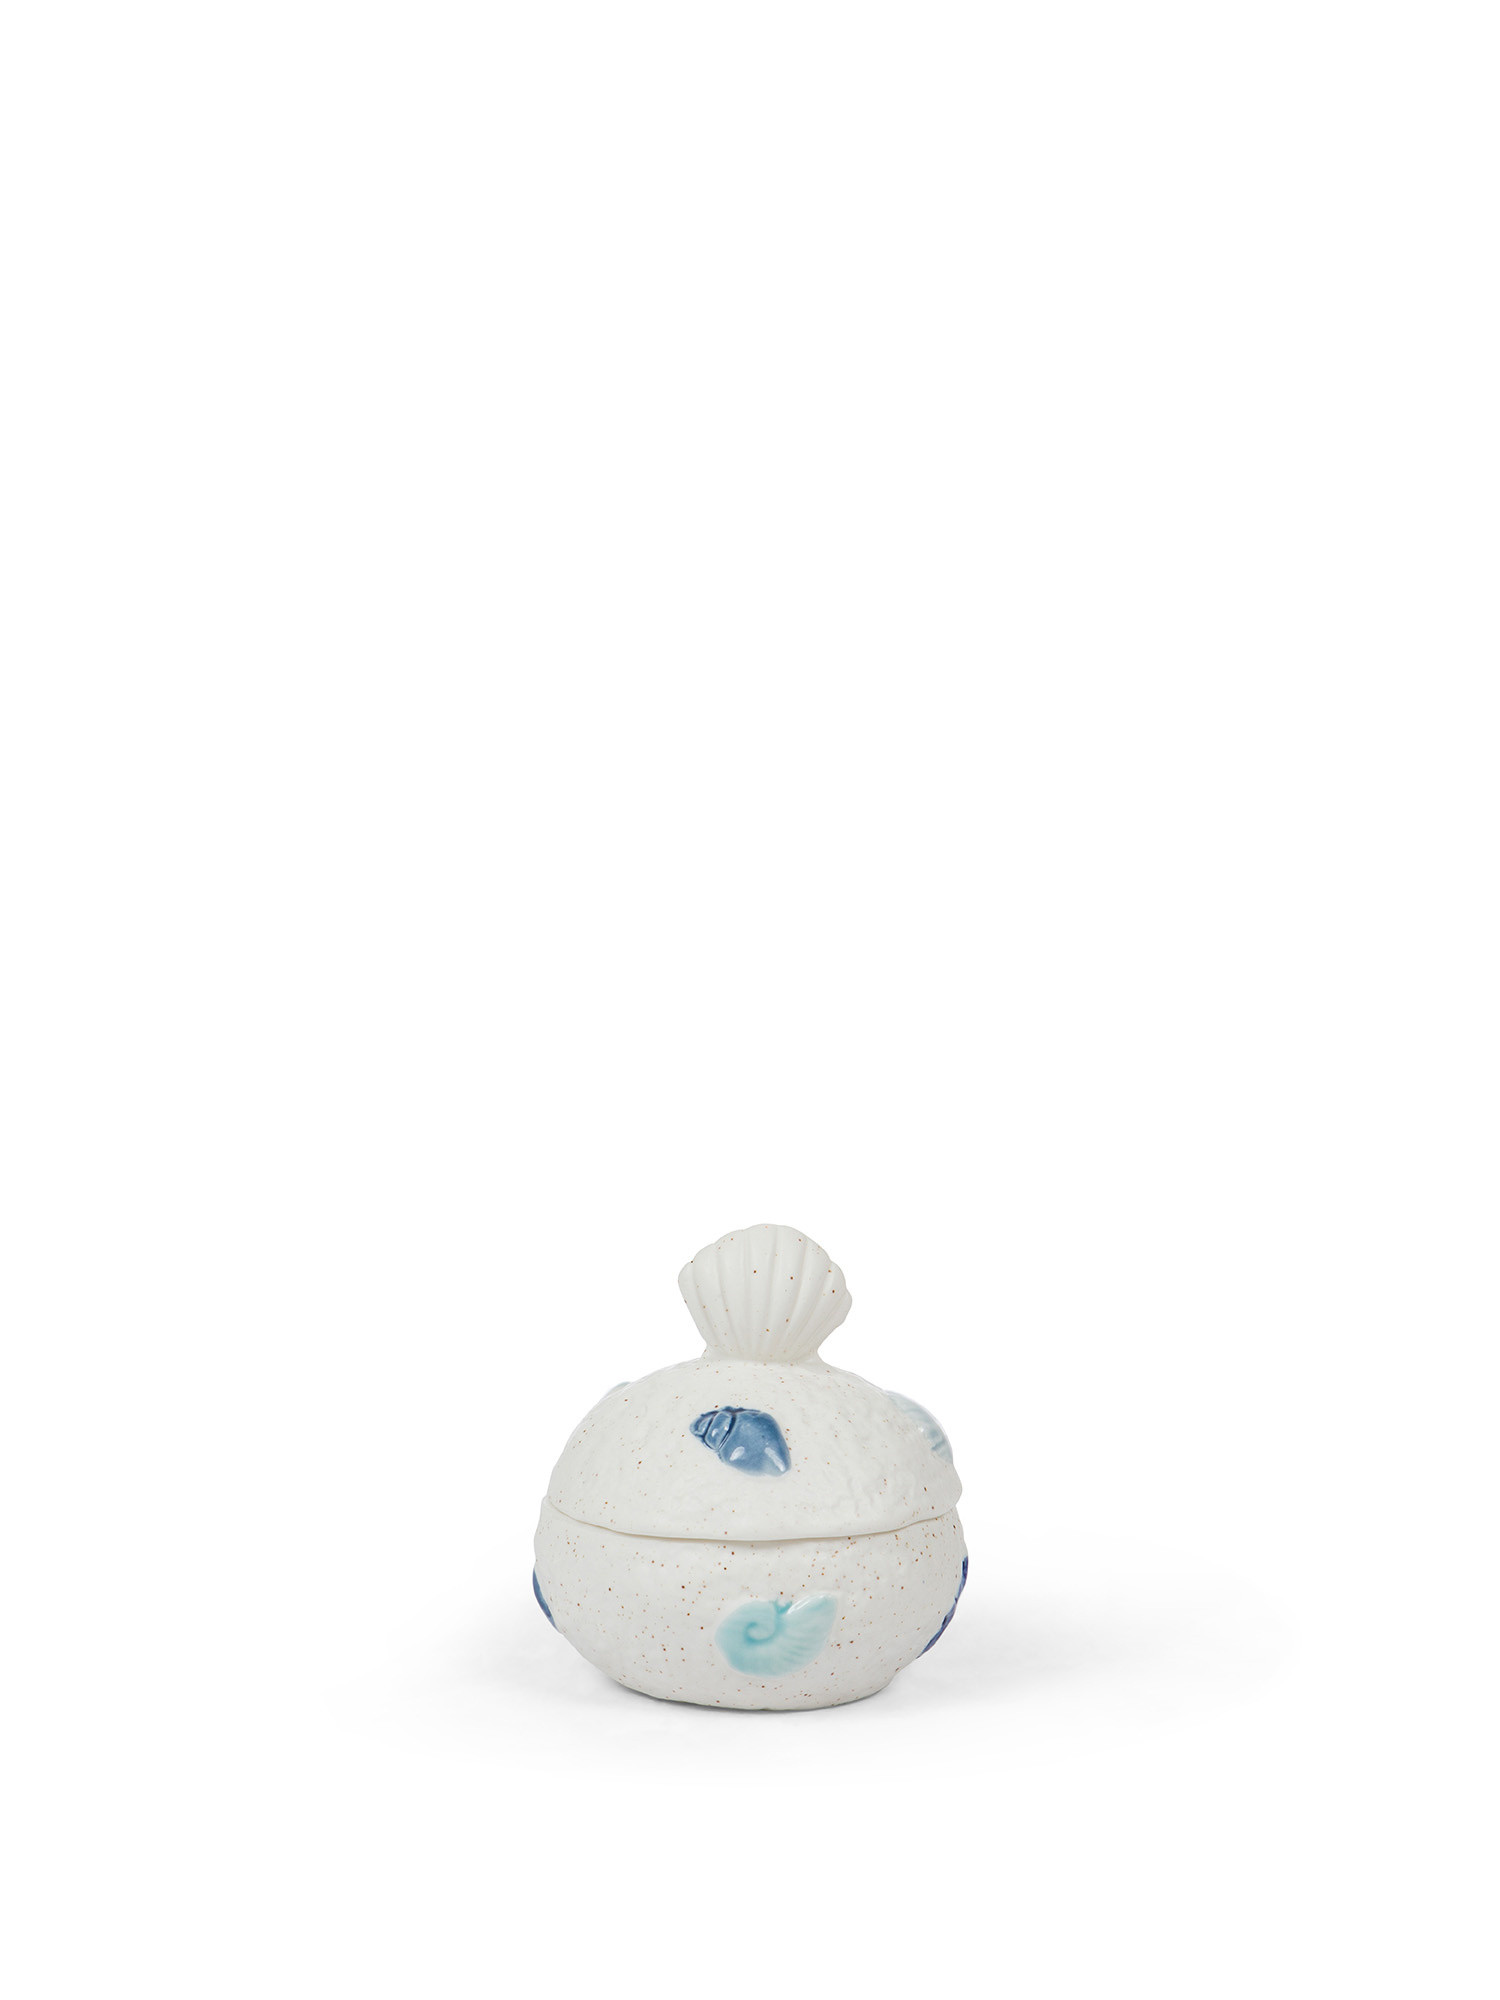 Porcelain container with shells, White / Blue, large image number 0